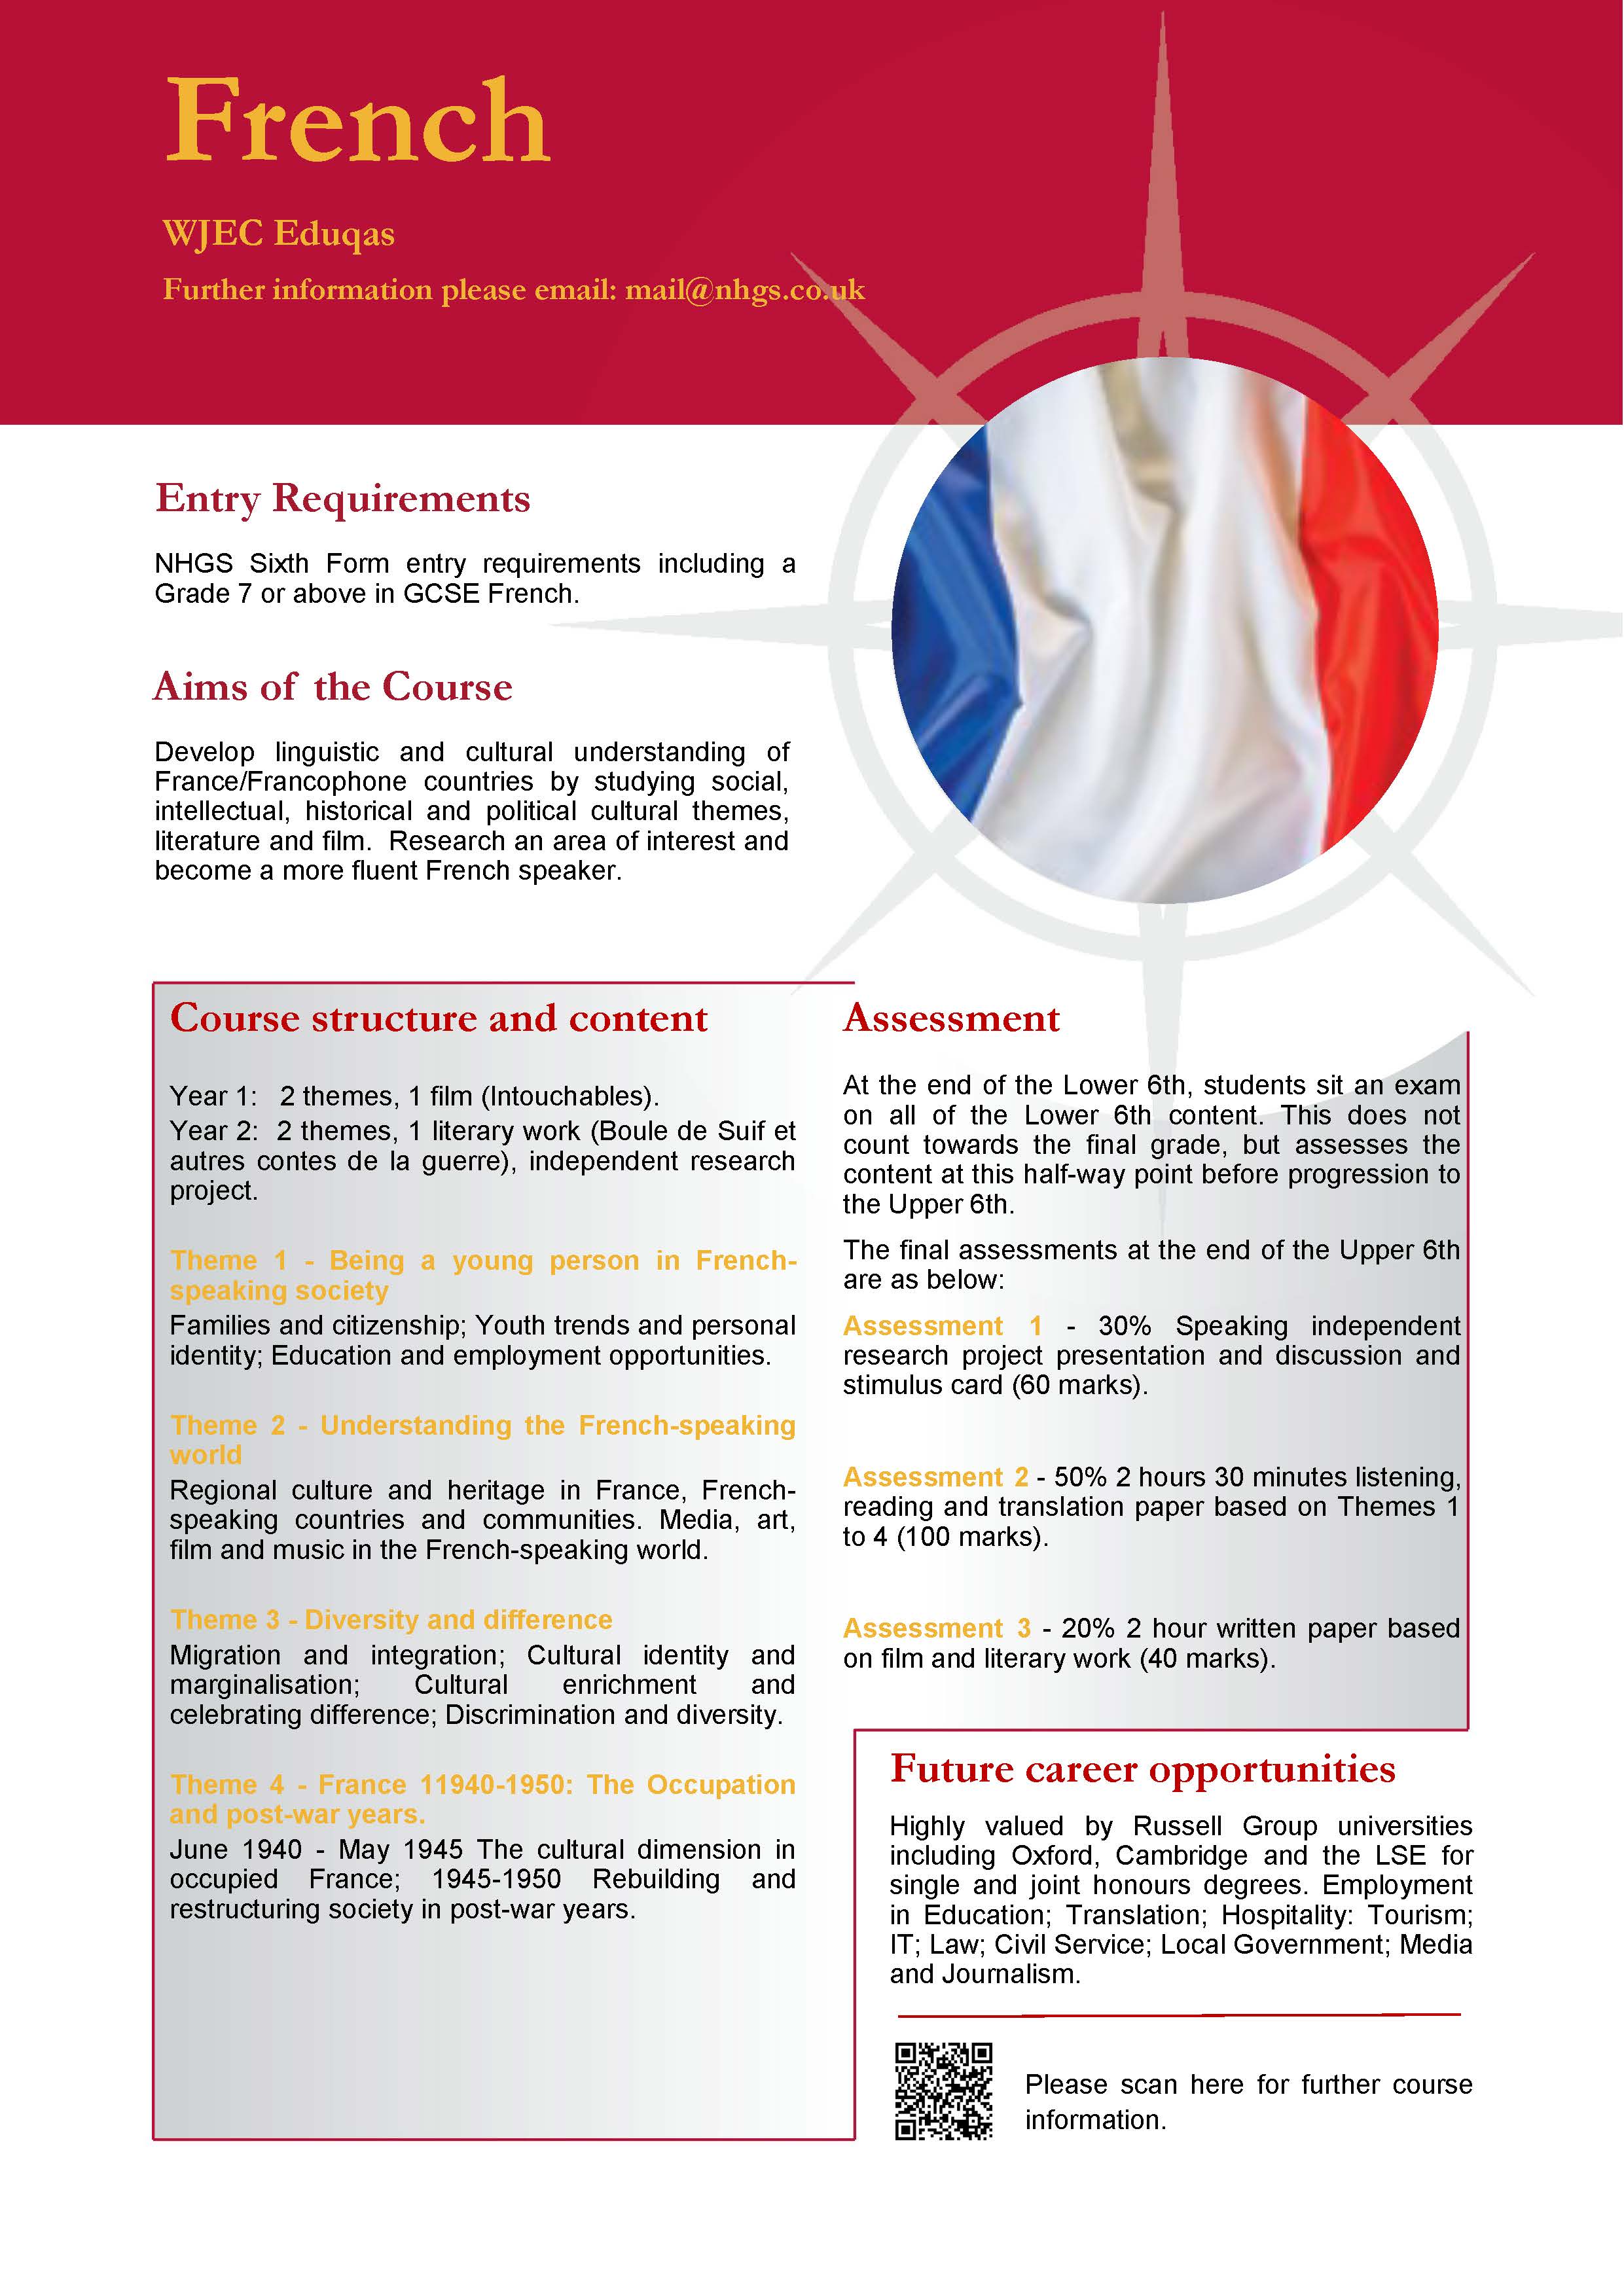 French A Level Course Flyer, NHGS Sixth Form